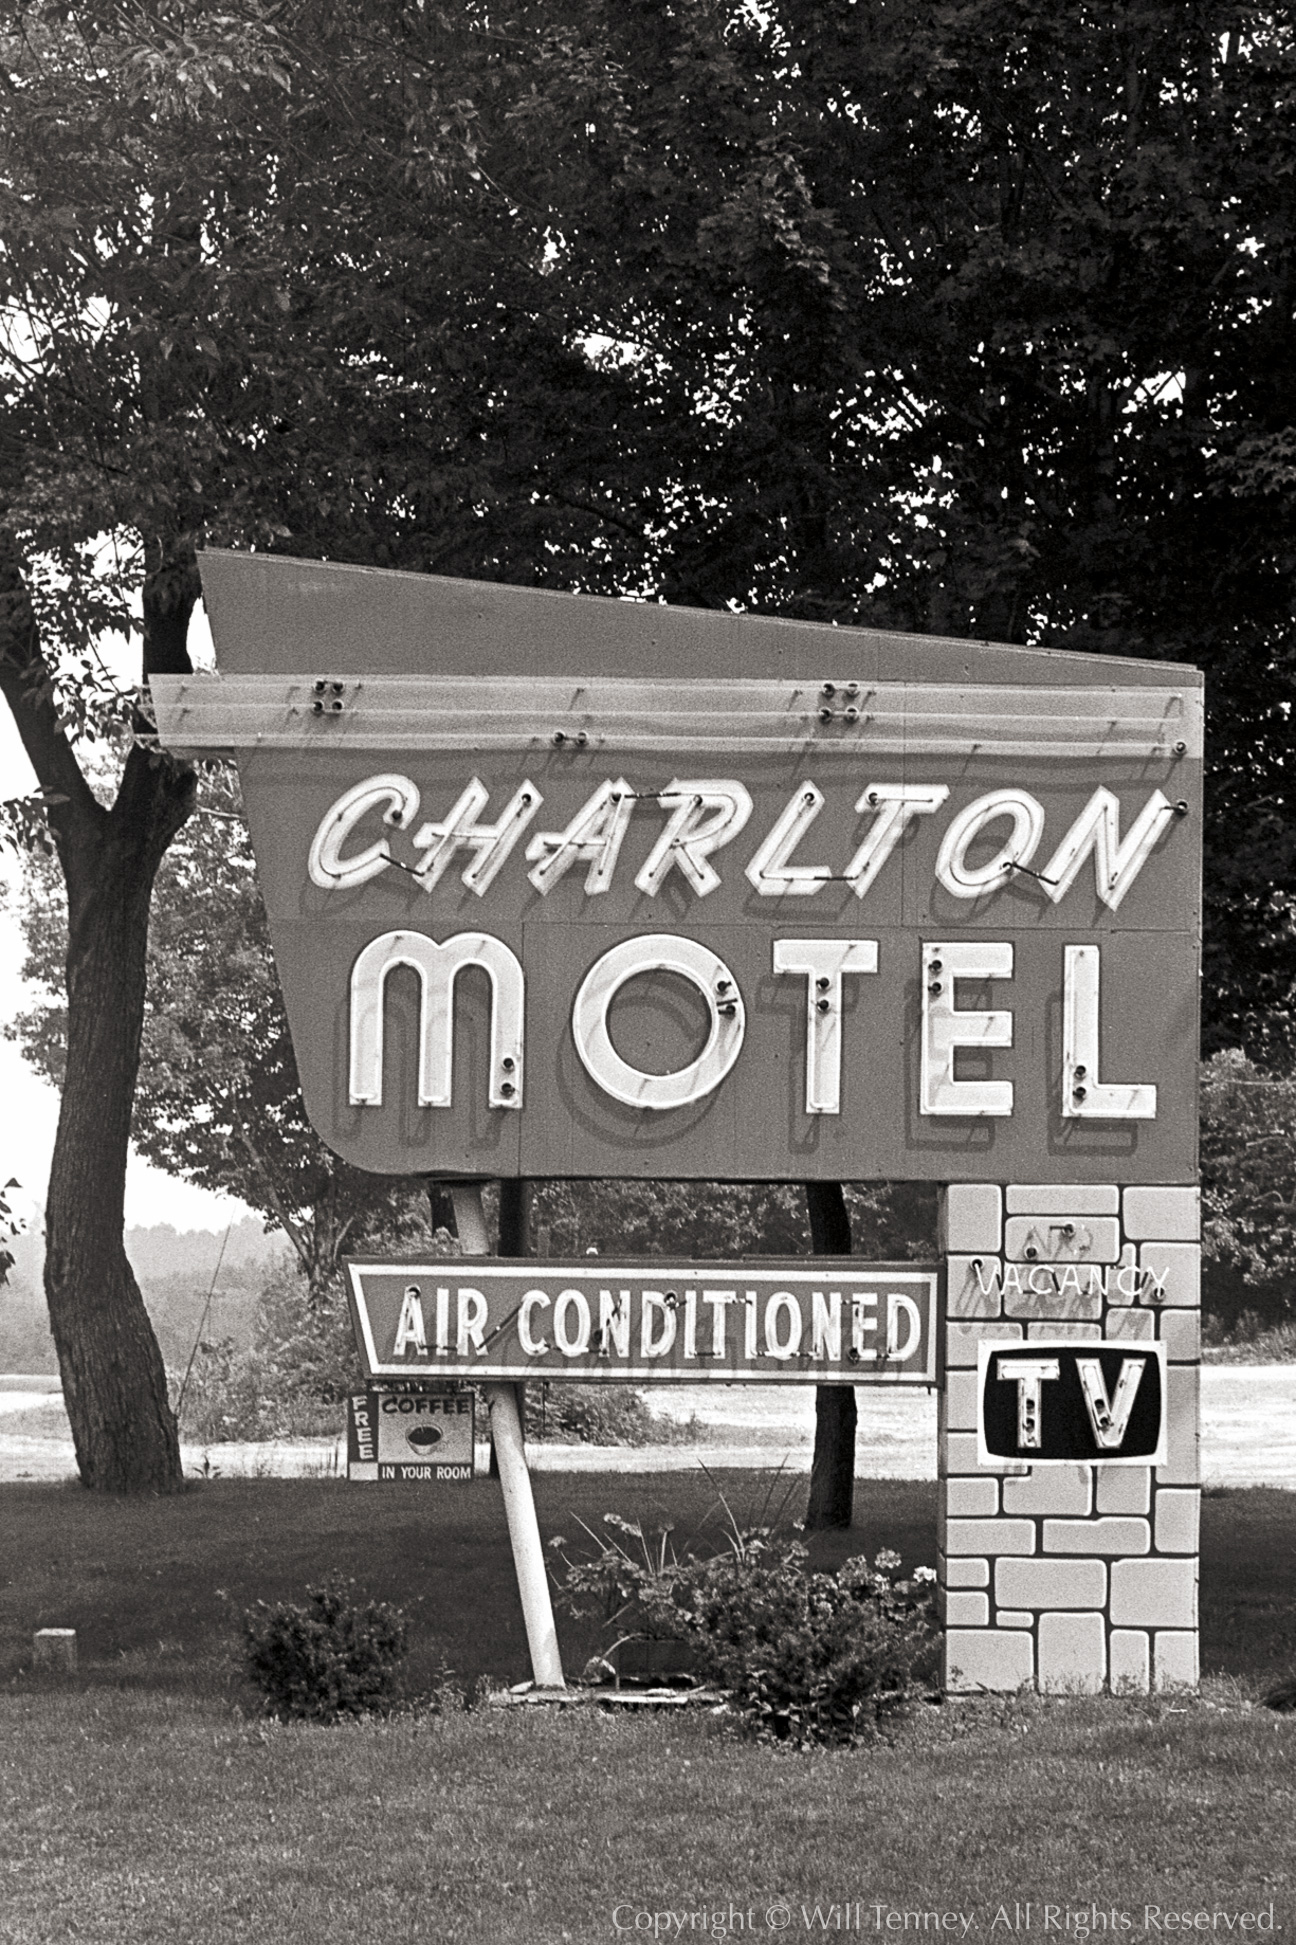 Charlton Motel: Photograph by Will Tenney